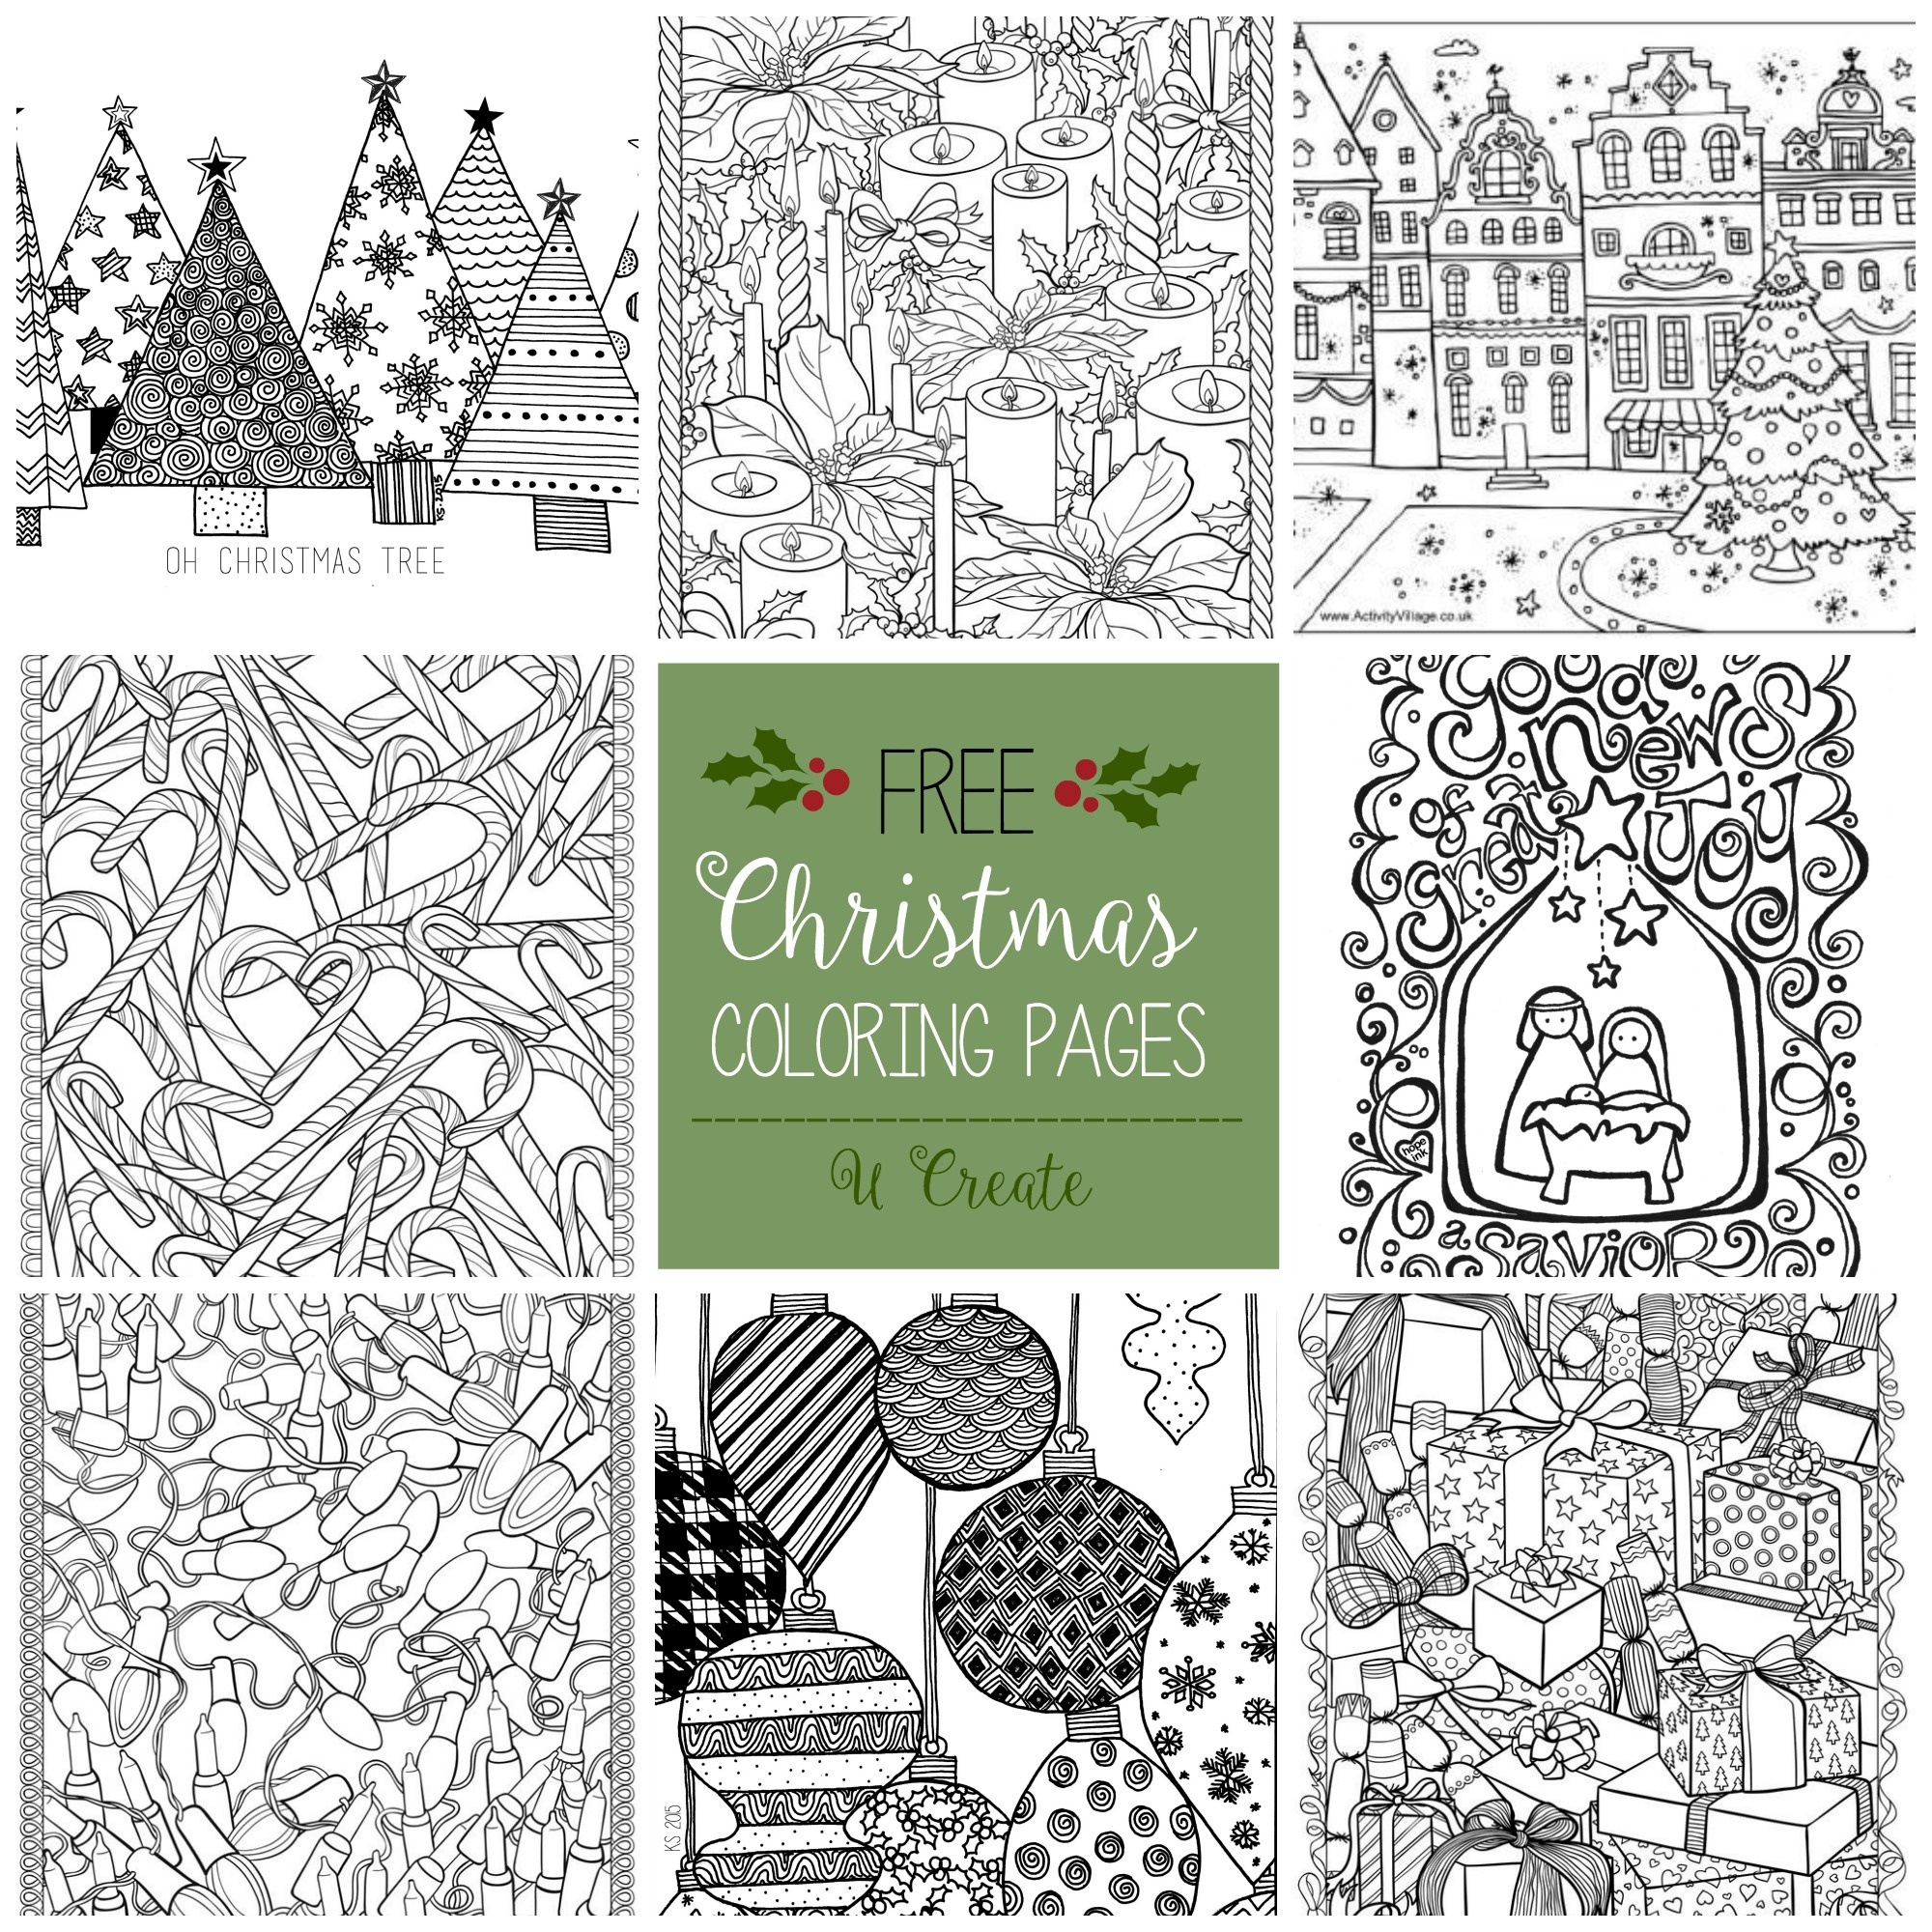 Free Christmas Adult Coloring Pages - U Create - Free Printable Holiday Coloring Pages